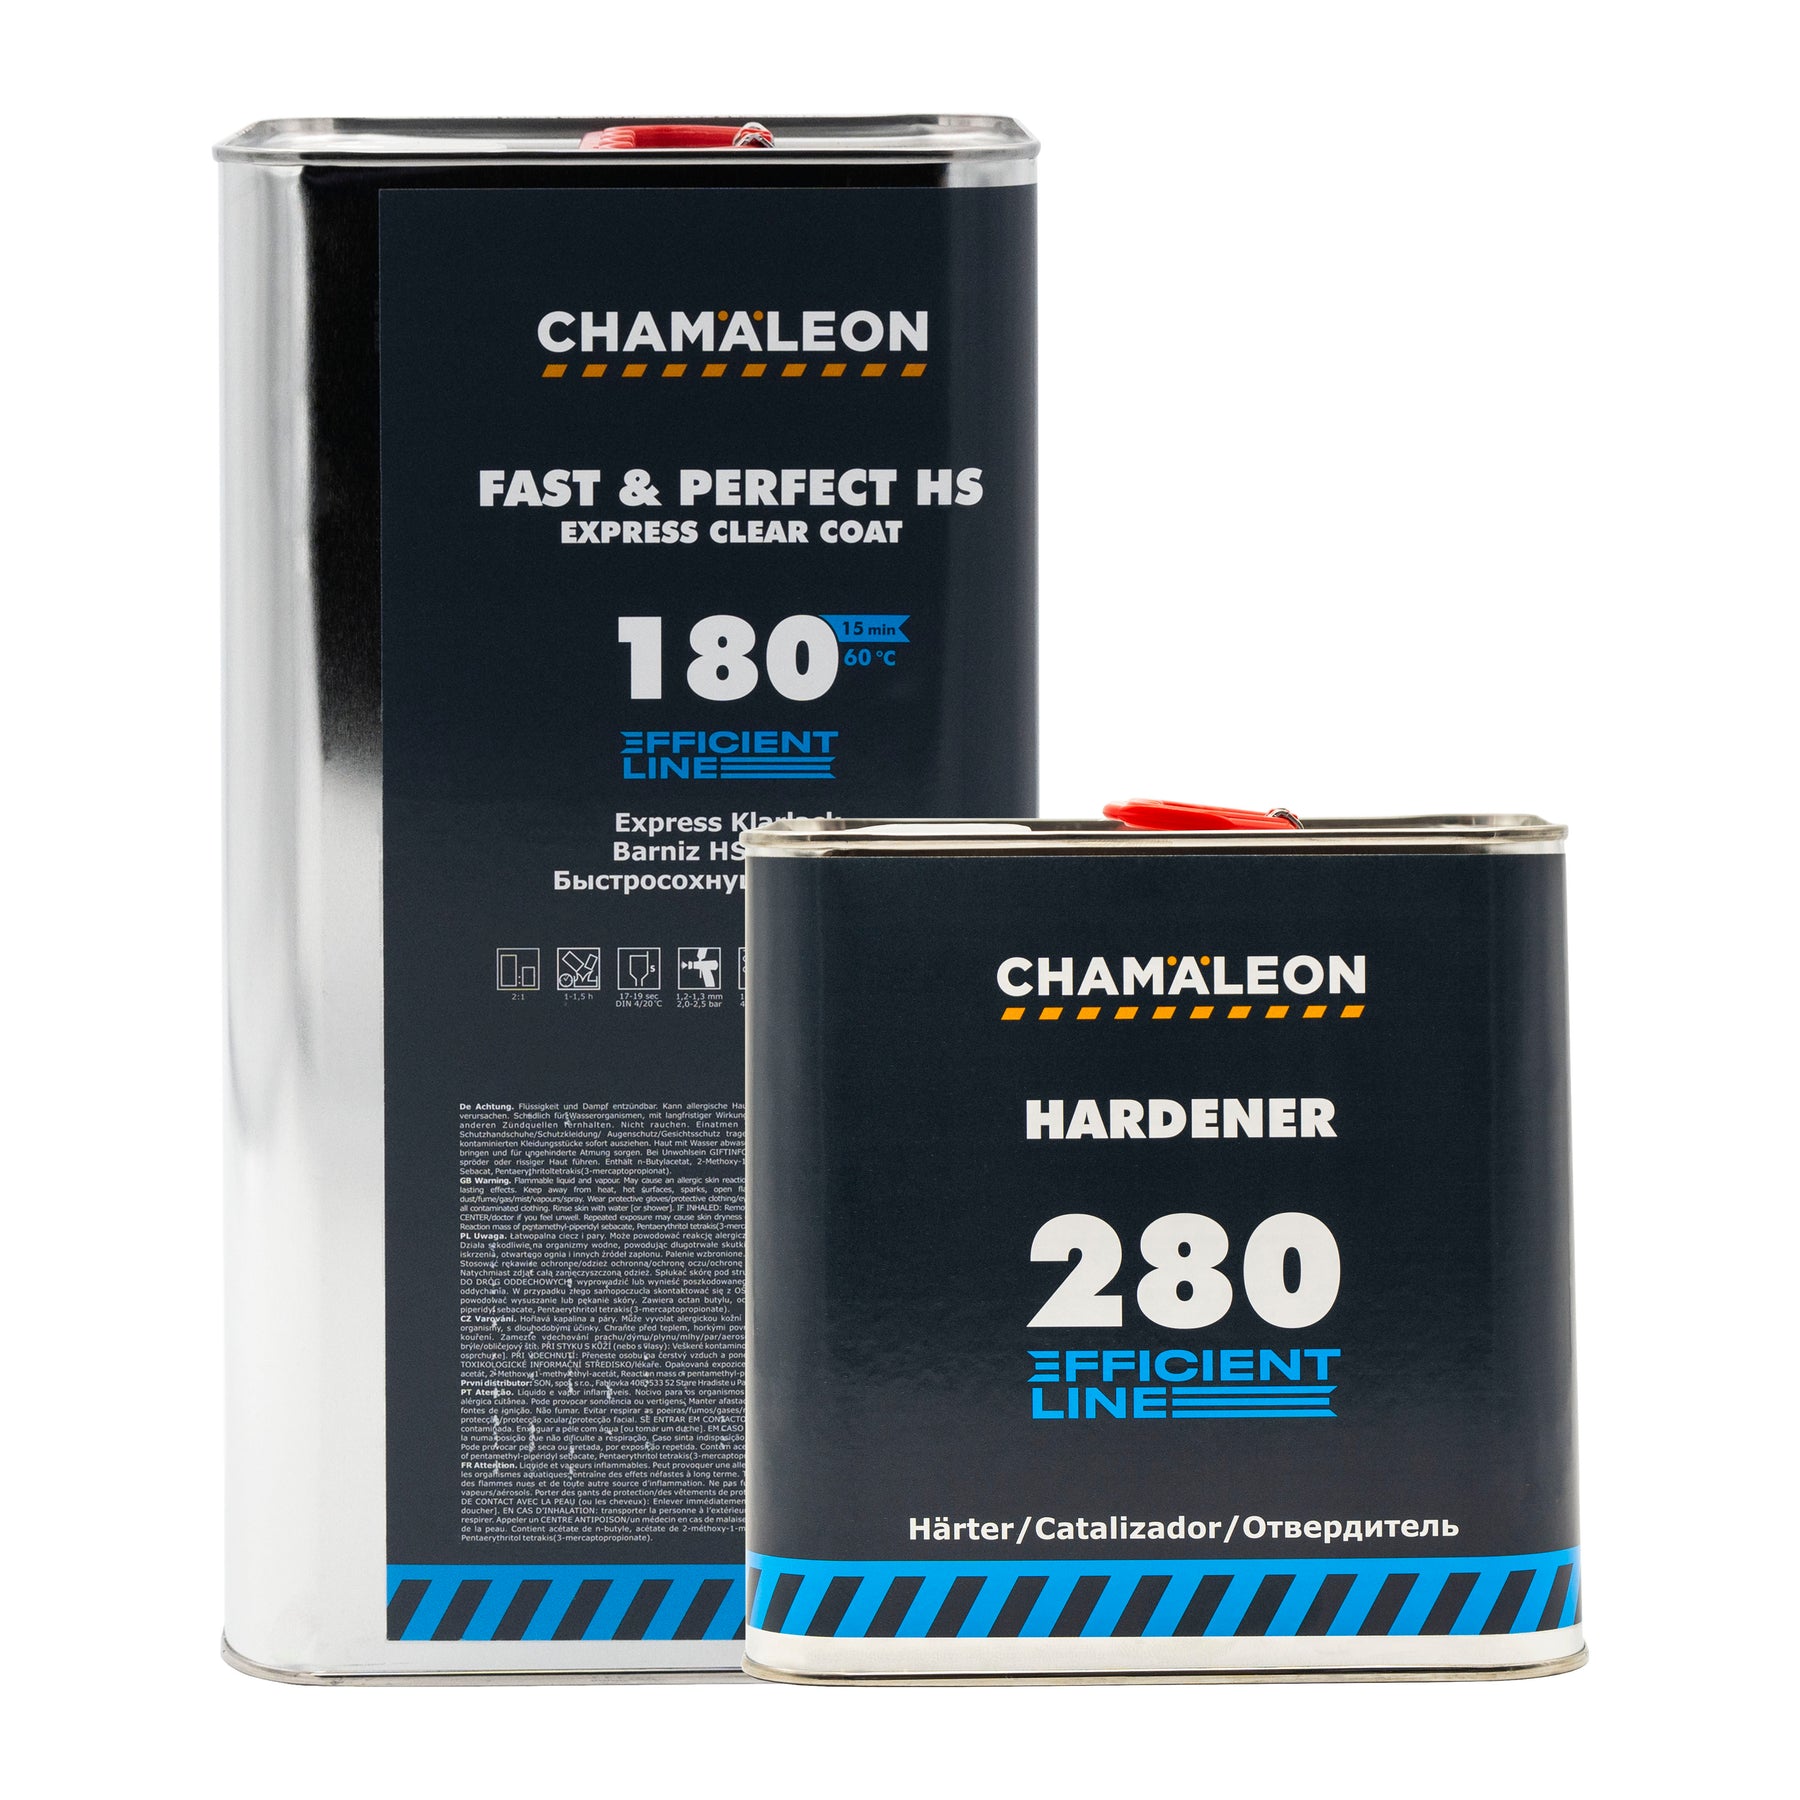 CHAMALEON Kit HS 2K Fast & Perfect Express Clear Coat 180 + catalizzatore